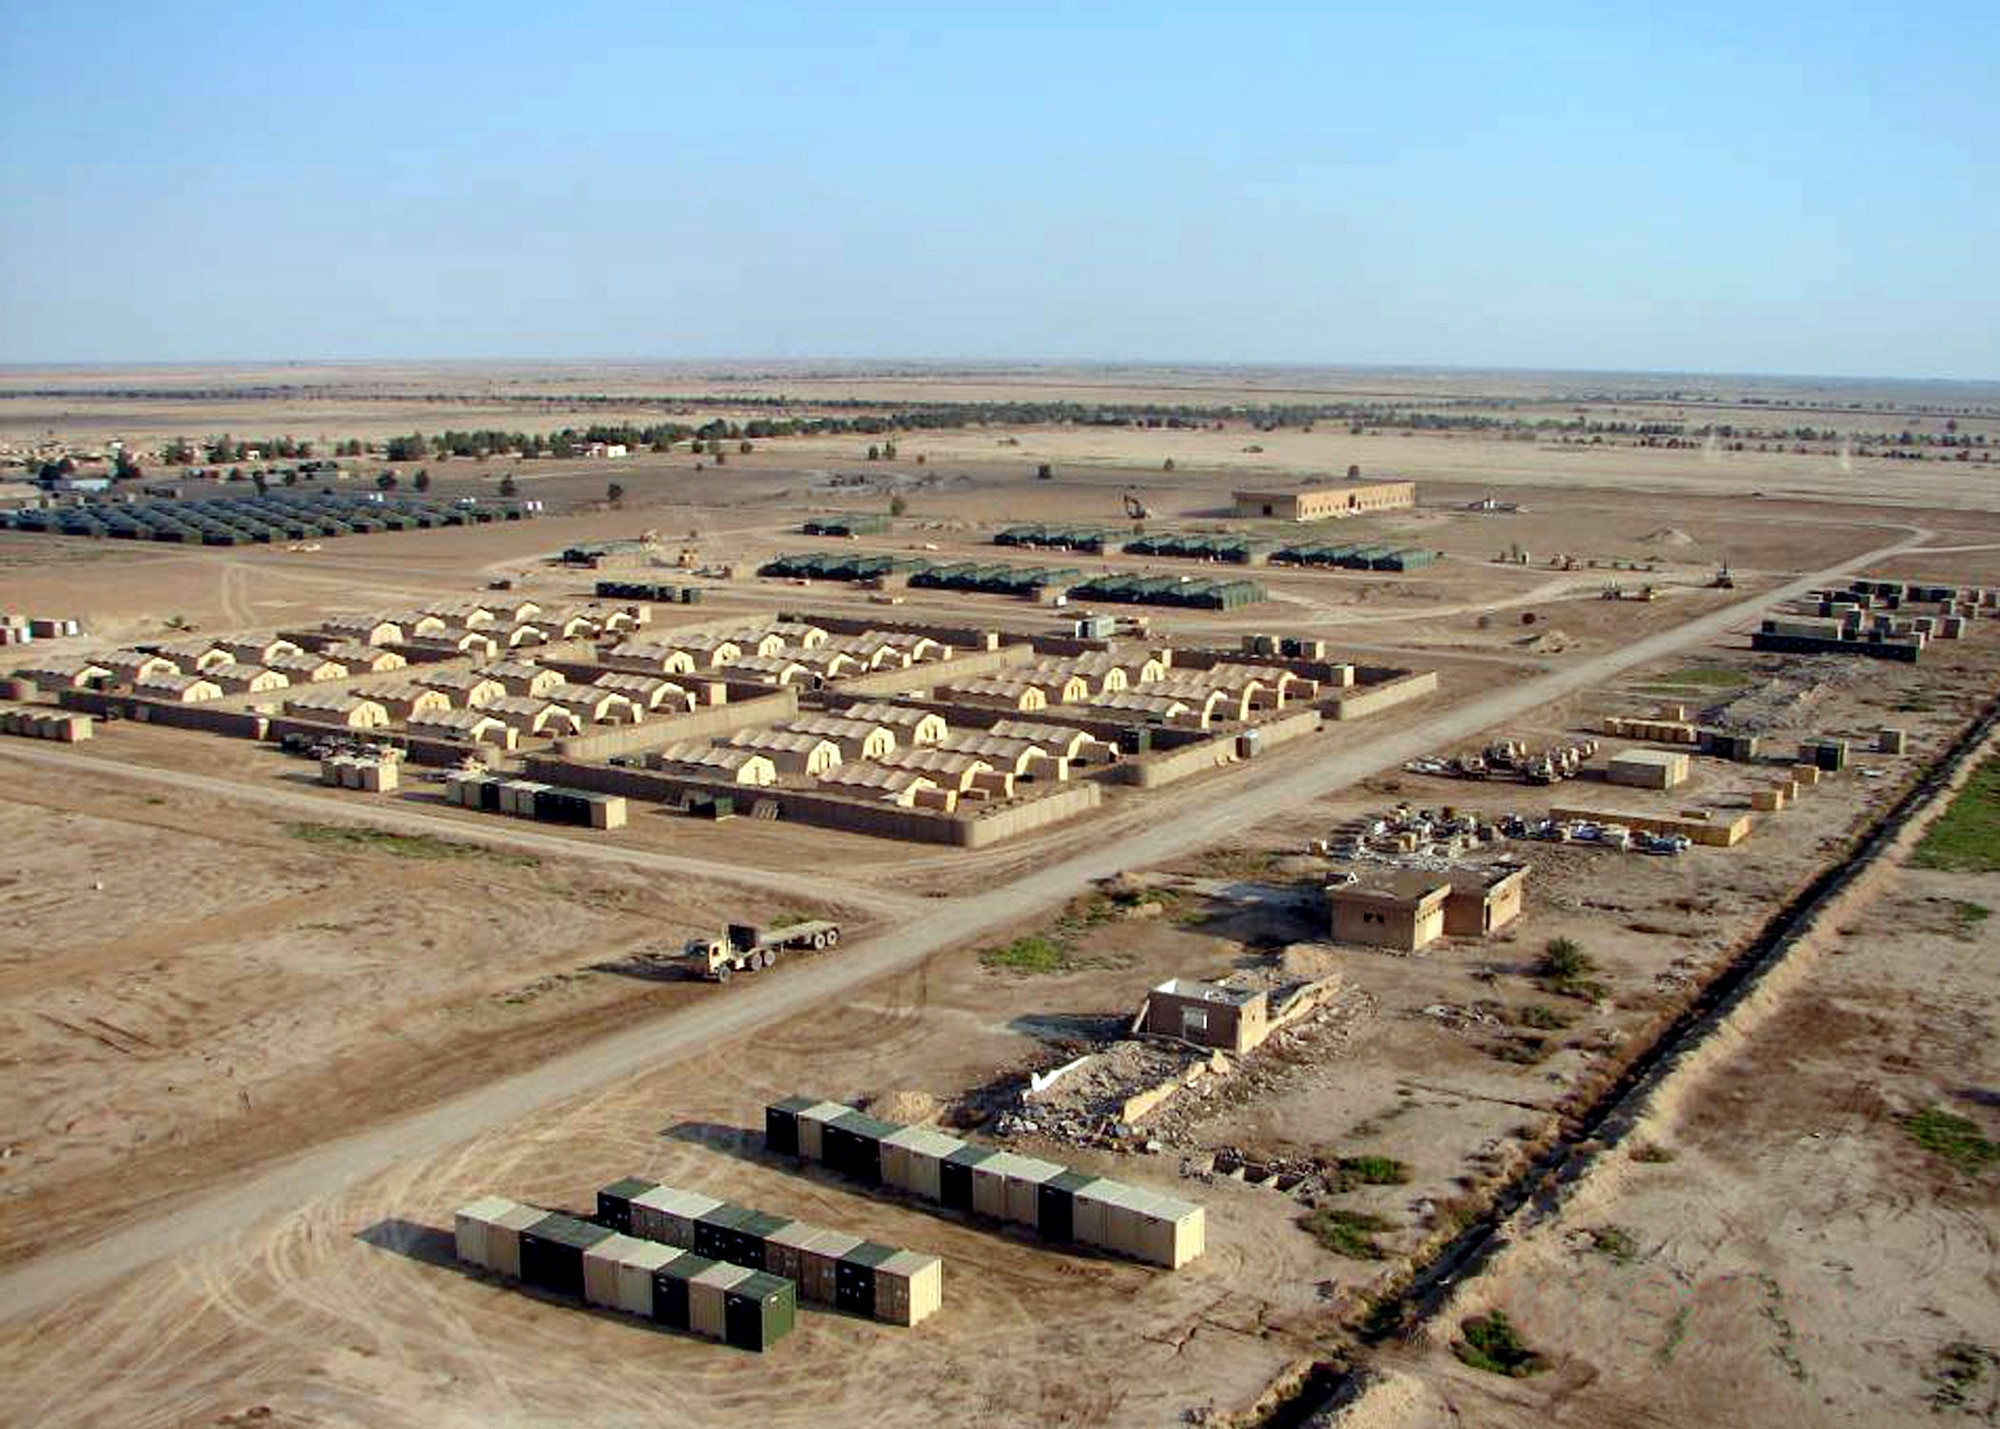 Pictured is an aerial view of Forward Operating Base Hammer, Iraq. Airmen from the 557th Expeditionary RED HORSE Squadron and Soldiers from the 92nd Engineer Battalion's "Black Diamonds" have completed Phases 1 and 2 of the multi-part Besmaya project to bed down the Army's 3rd Brigade Combat Team, 3rd Infantry Division, from Fort Stewart, Ga., in support of the Baghdad Security Plan. (U.S. Air Force photo) 